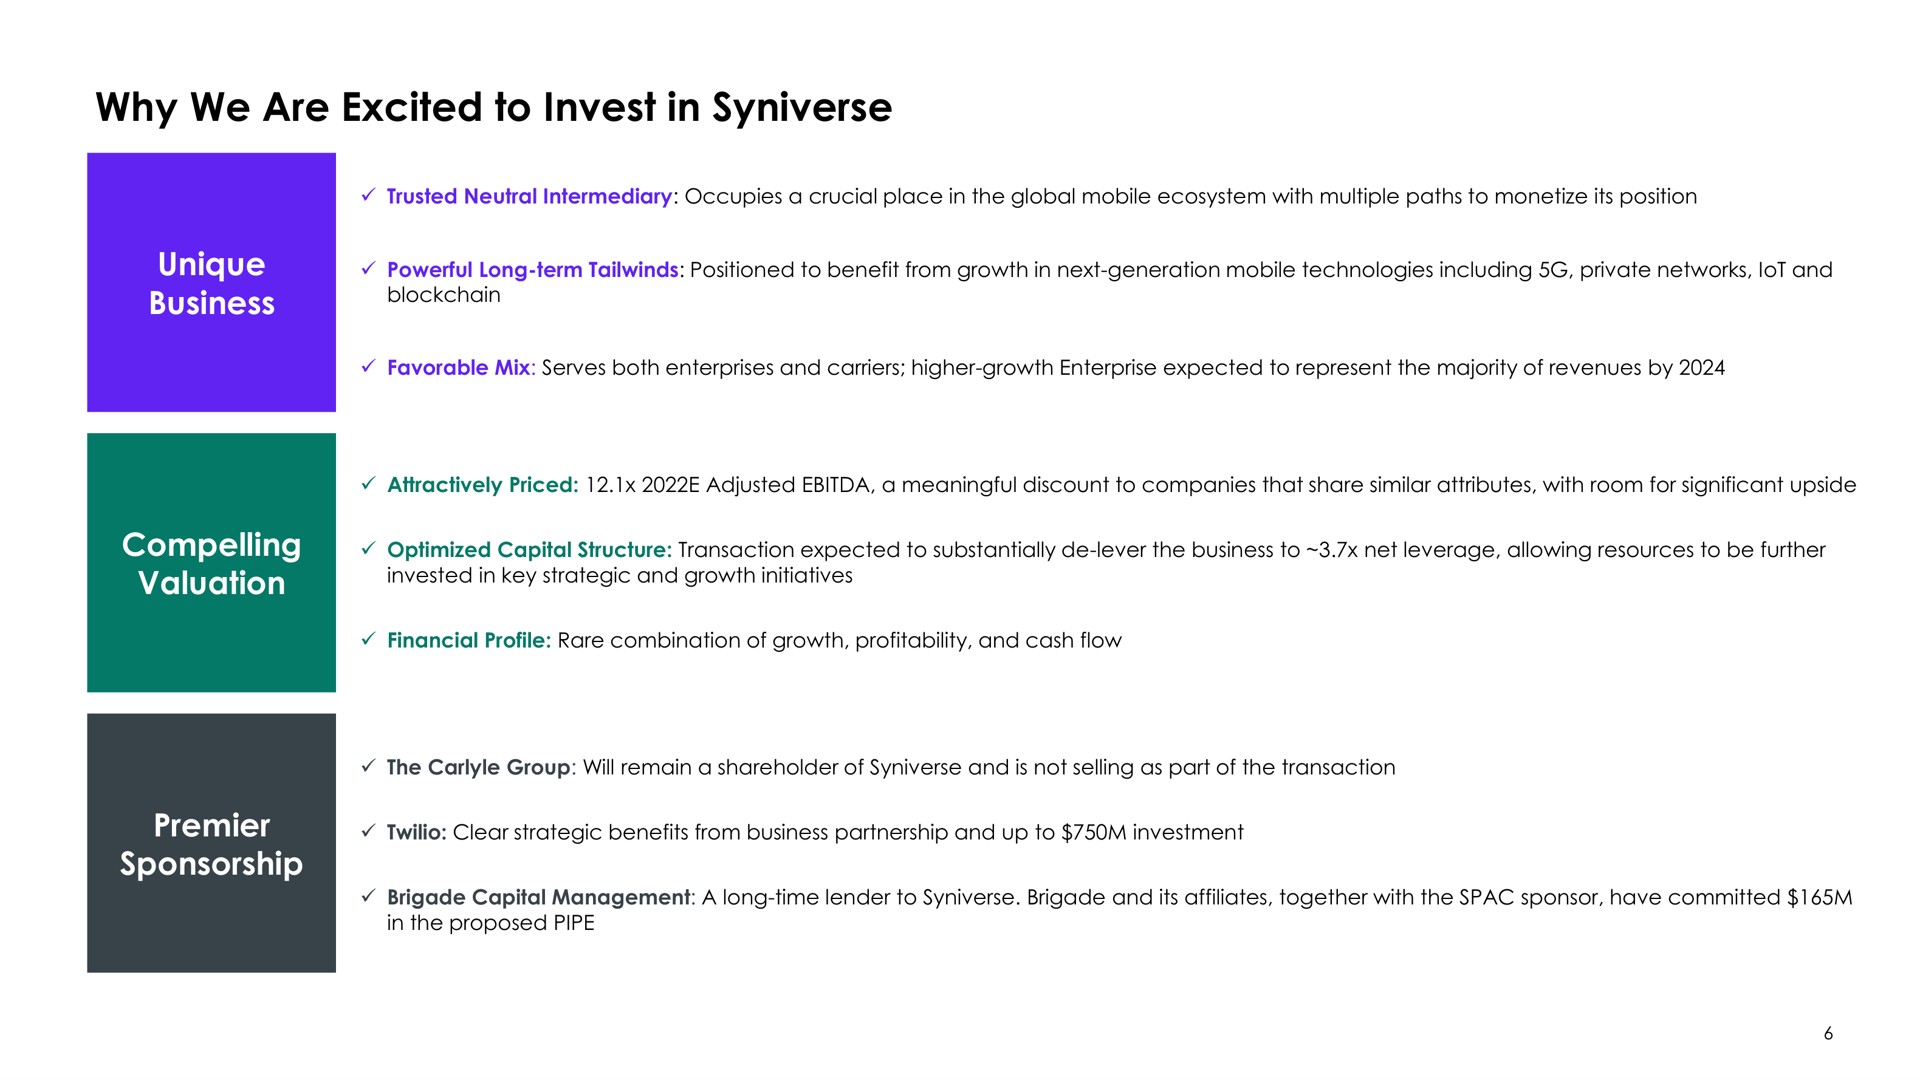 why we are excited to invest in unique compelling sponsorship premier | Syniverse